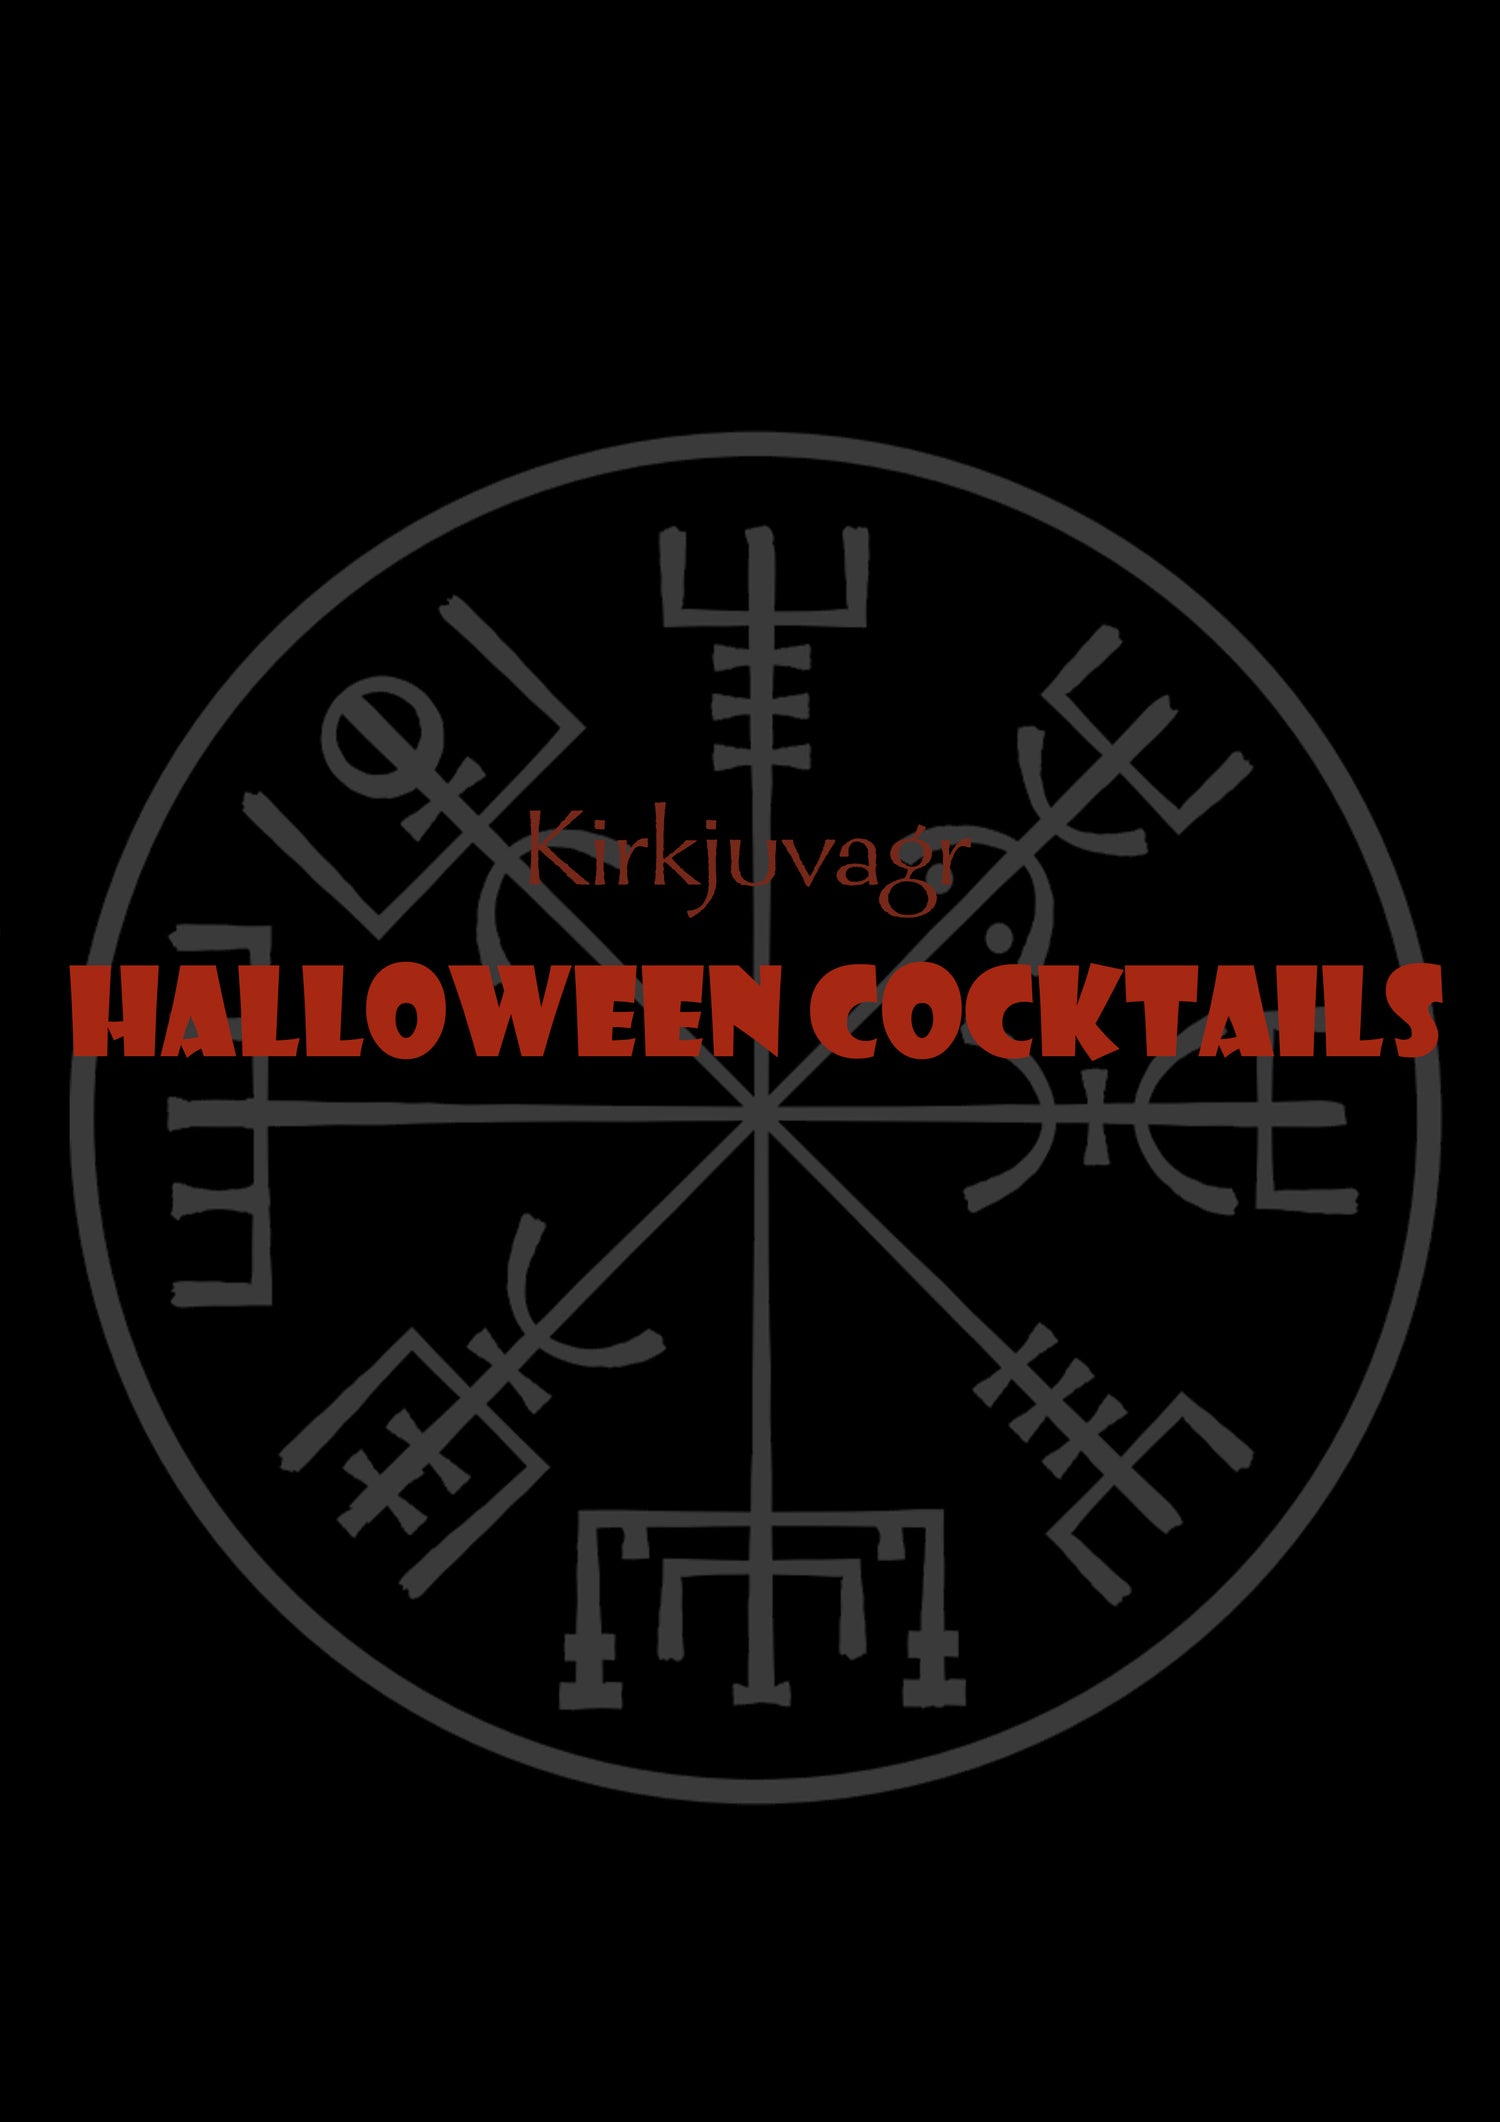 Halloween Gin Cocktails: So good, it's scary!